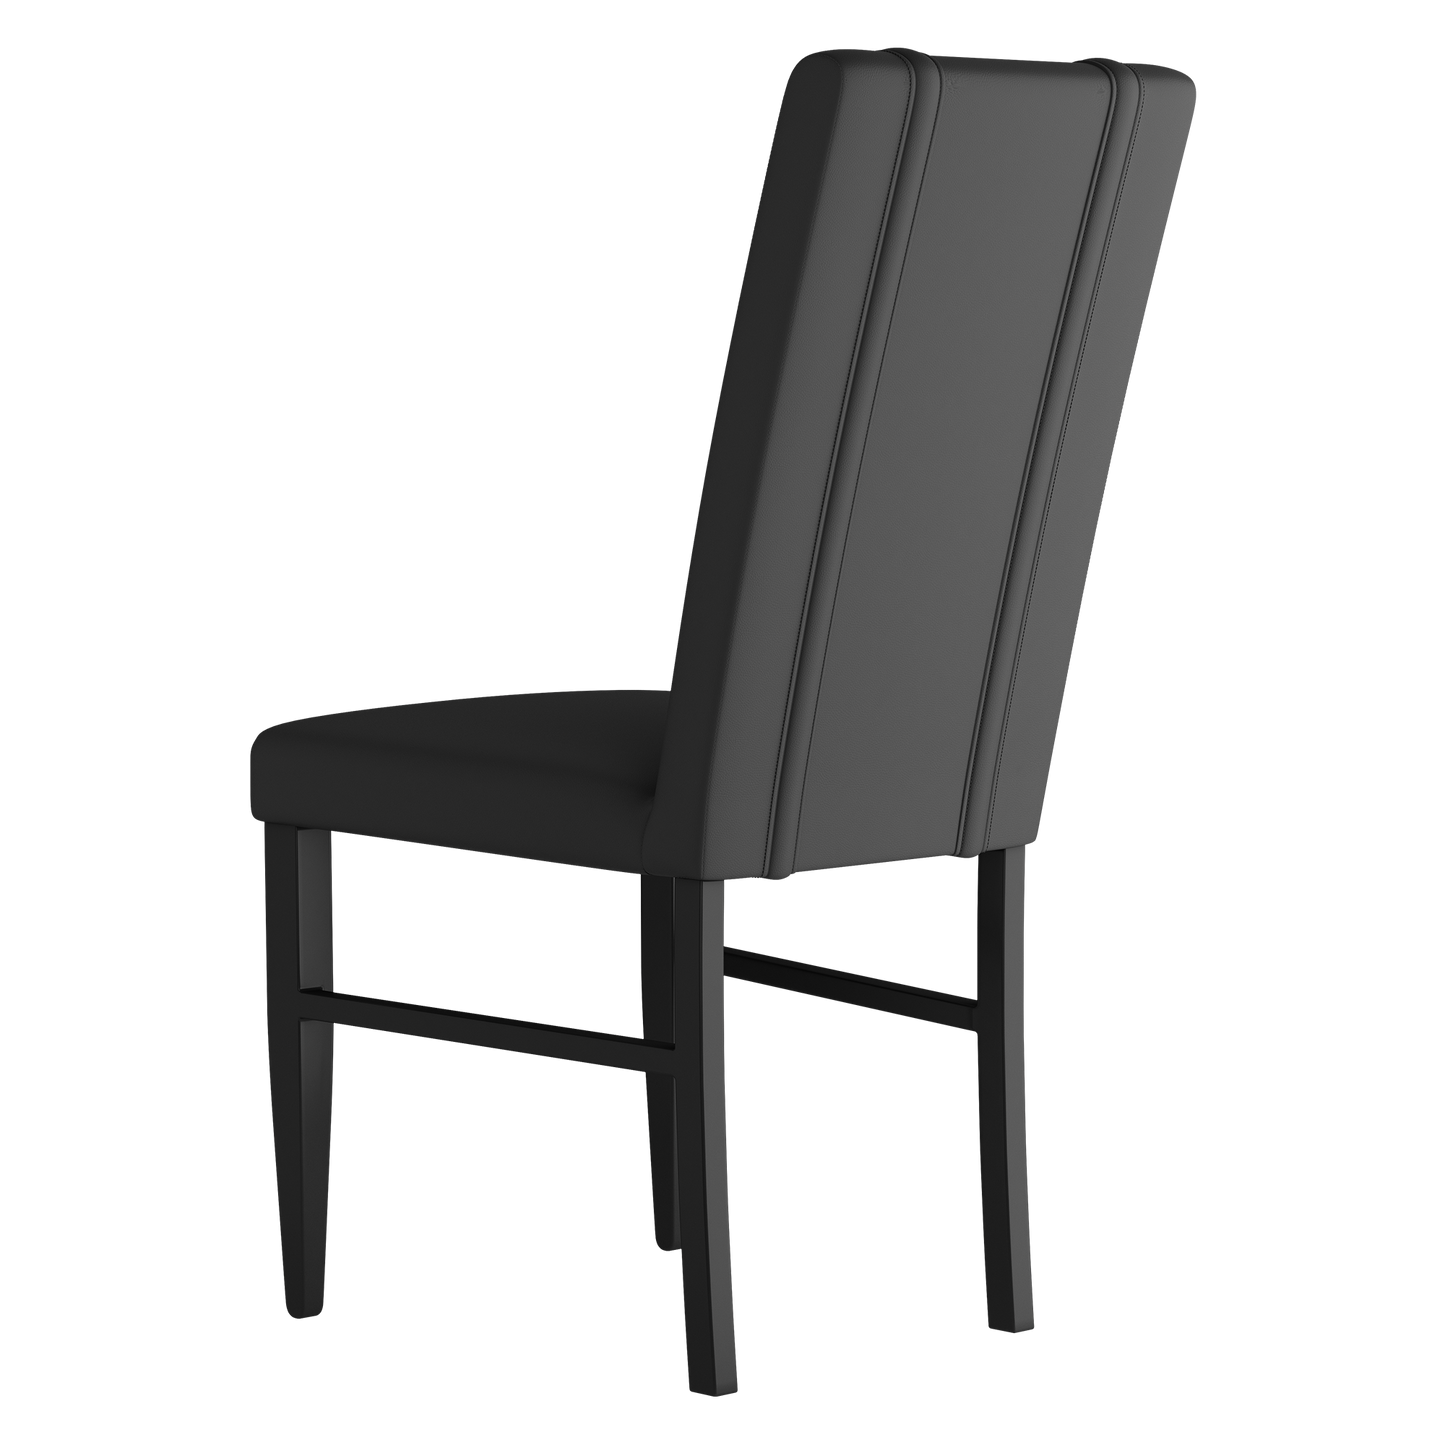 Side Chair 2000 with Philadelphia Phillies Secondary Set of 2